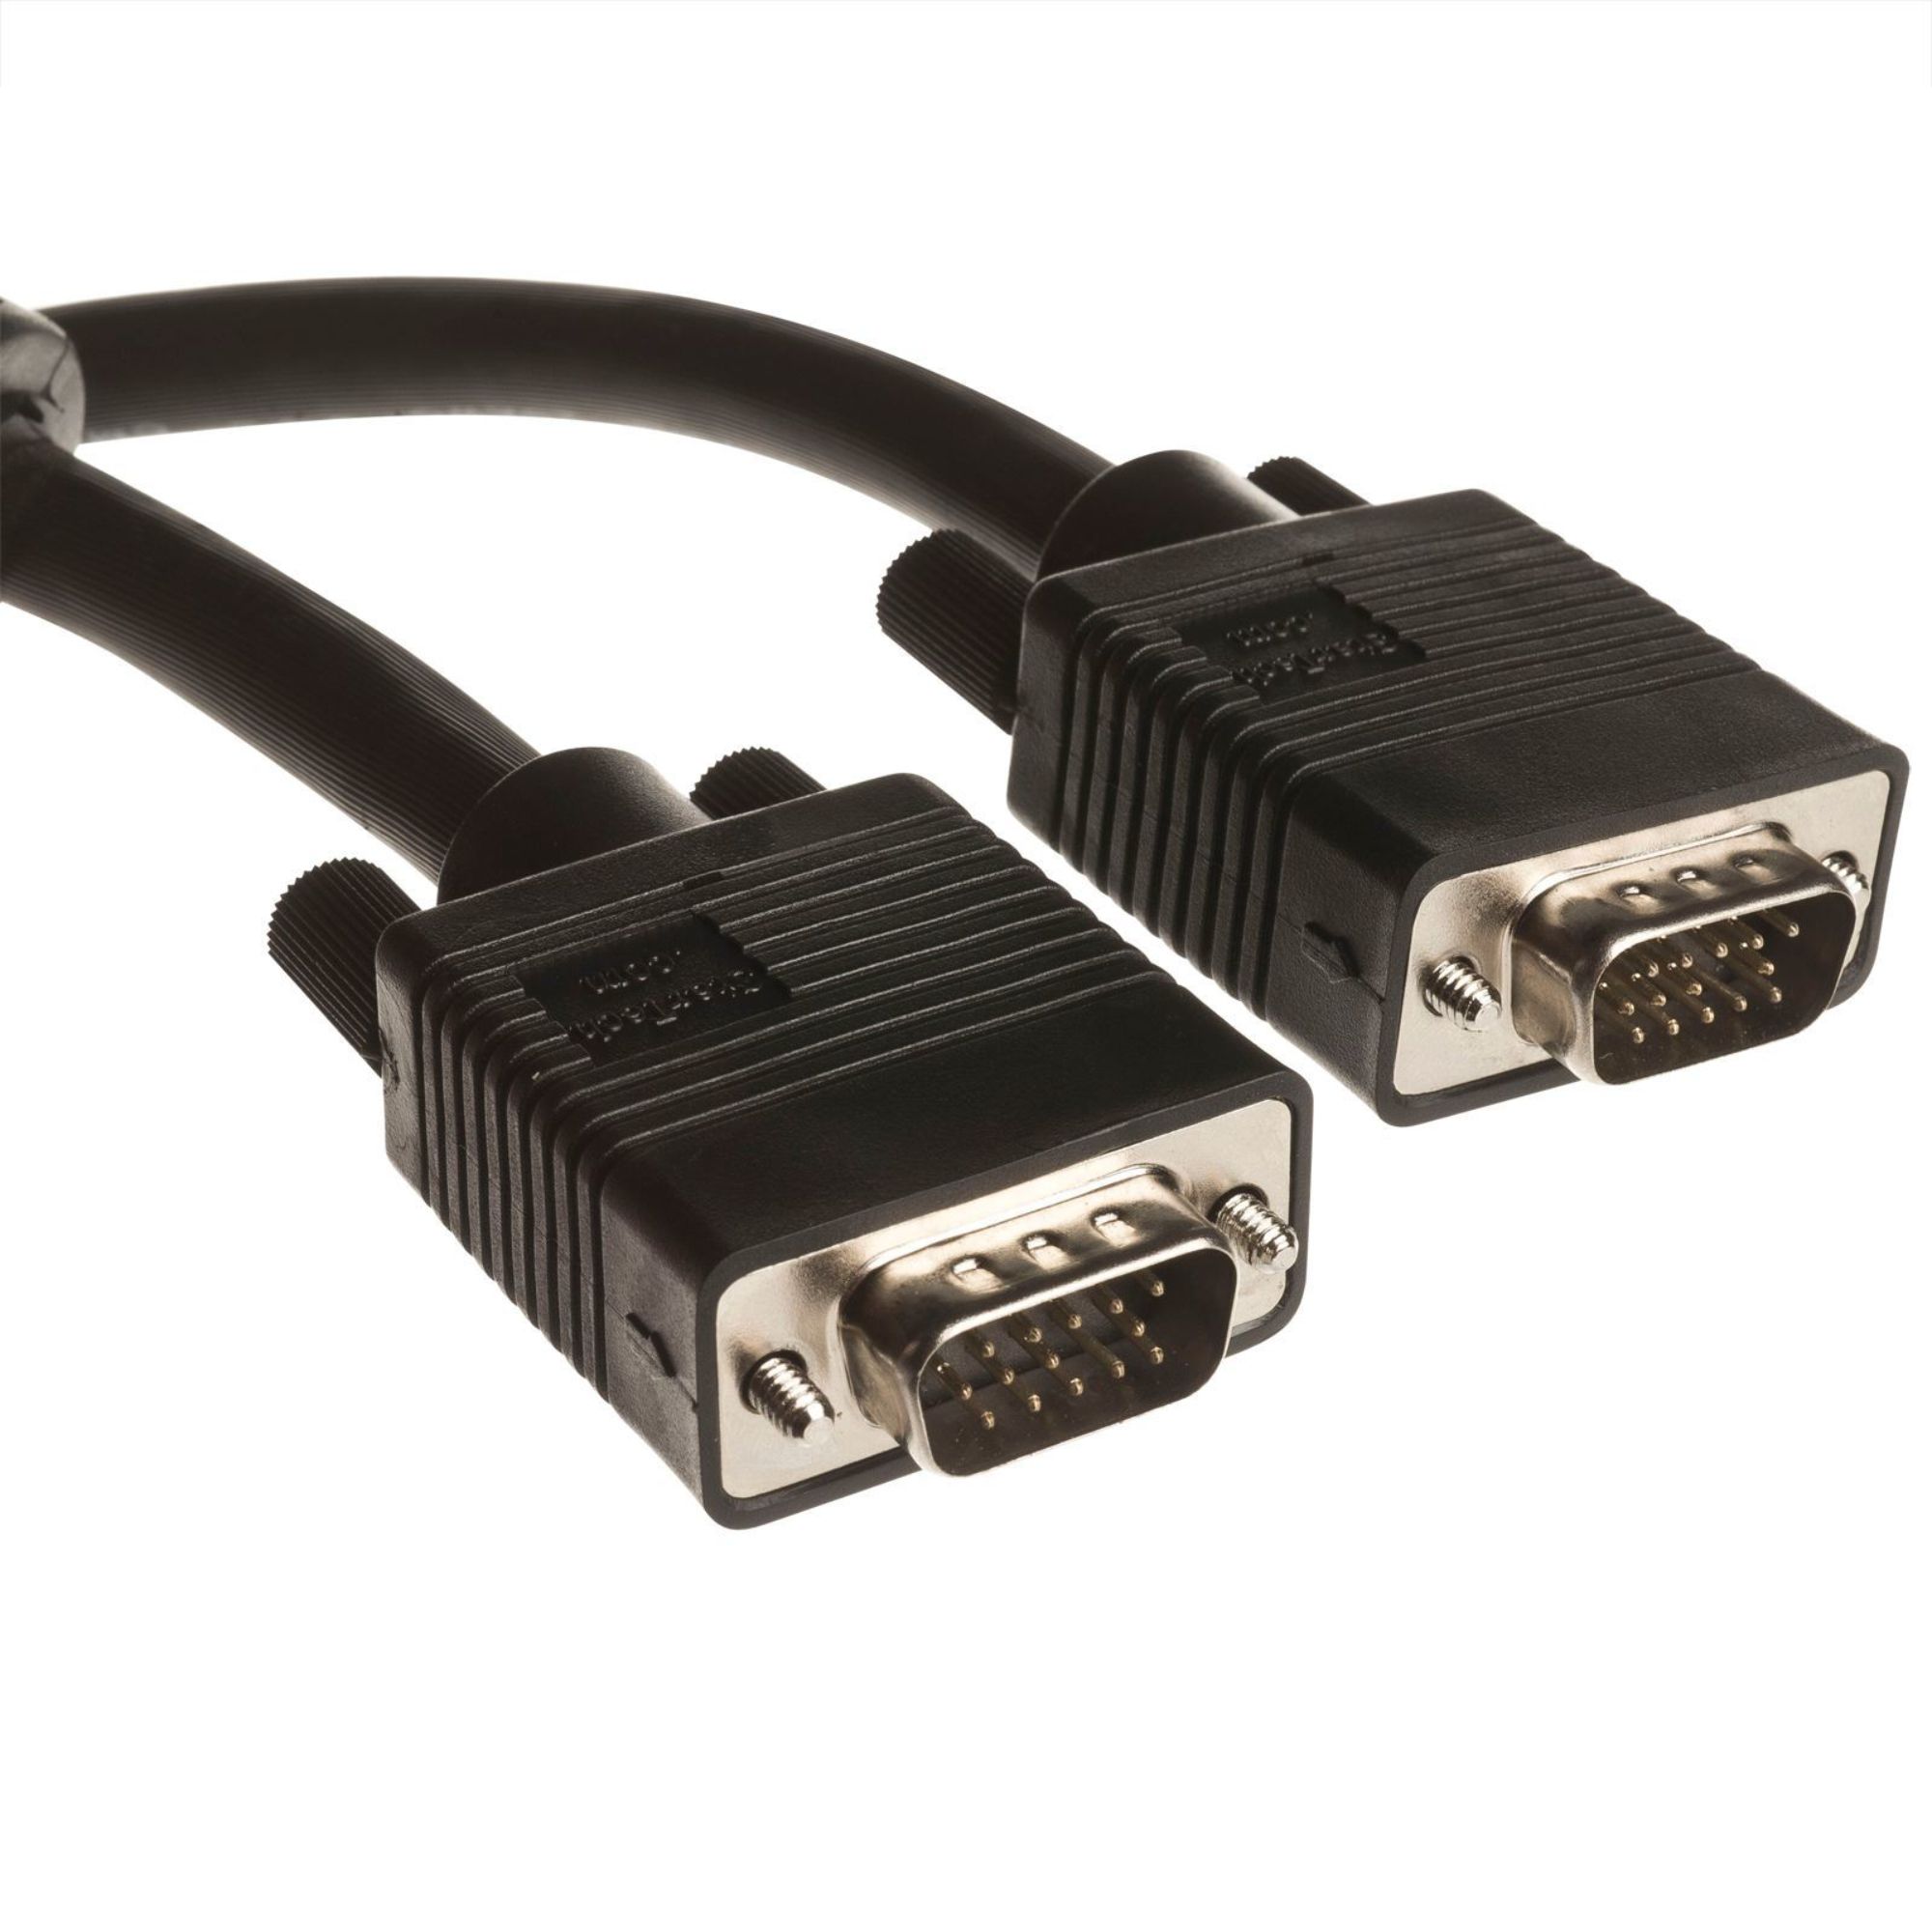 VGA Cable (Two Male VGA Connectors - 10 Meters)